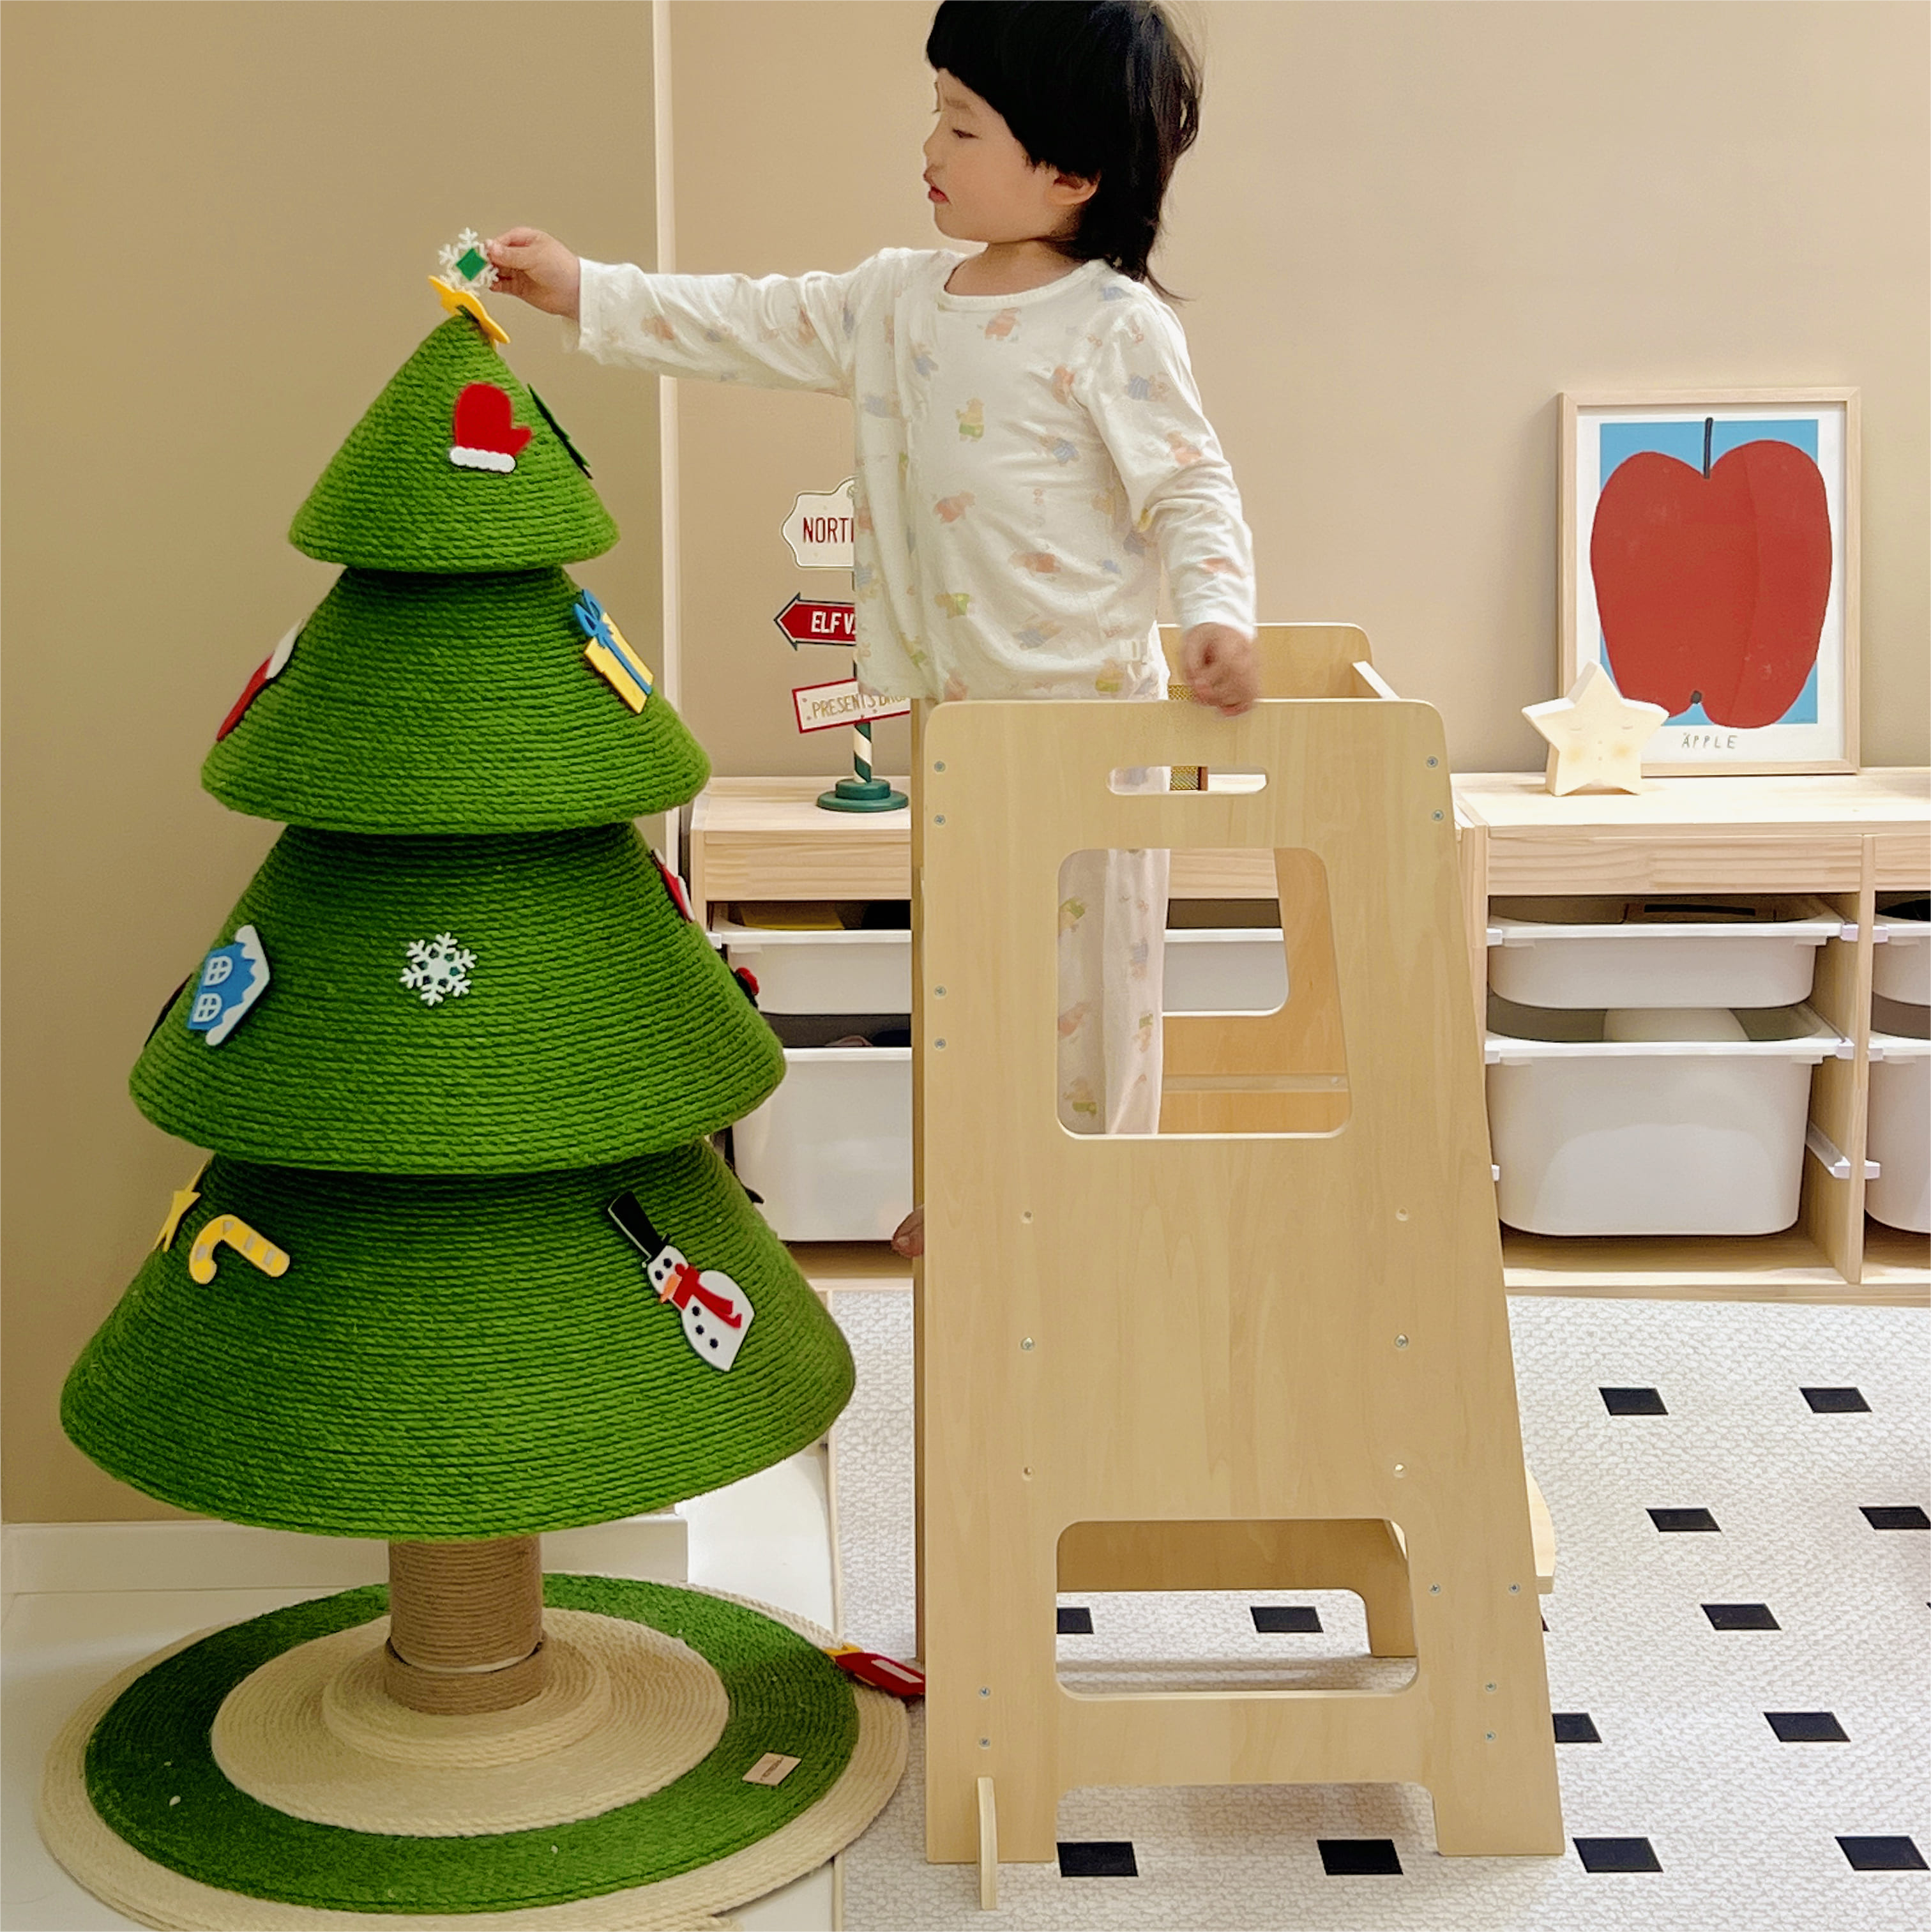 Wooden Learning Tower adjustable height Step Stool Helper